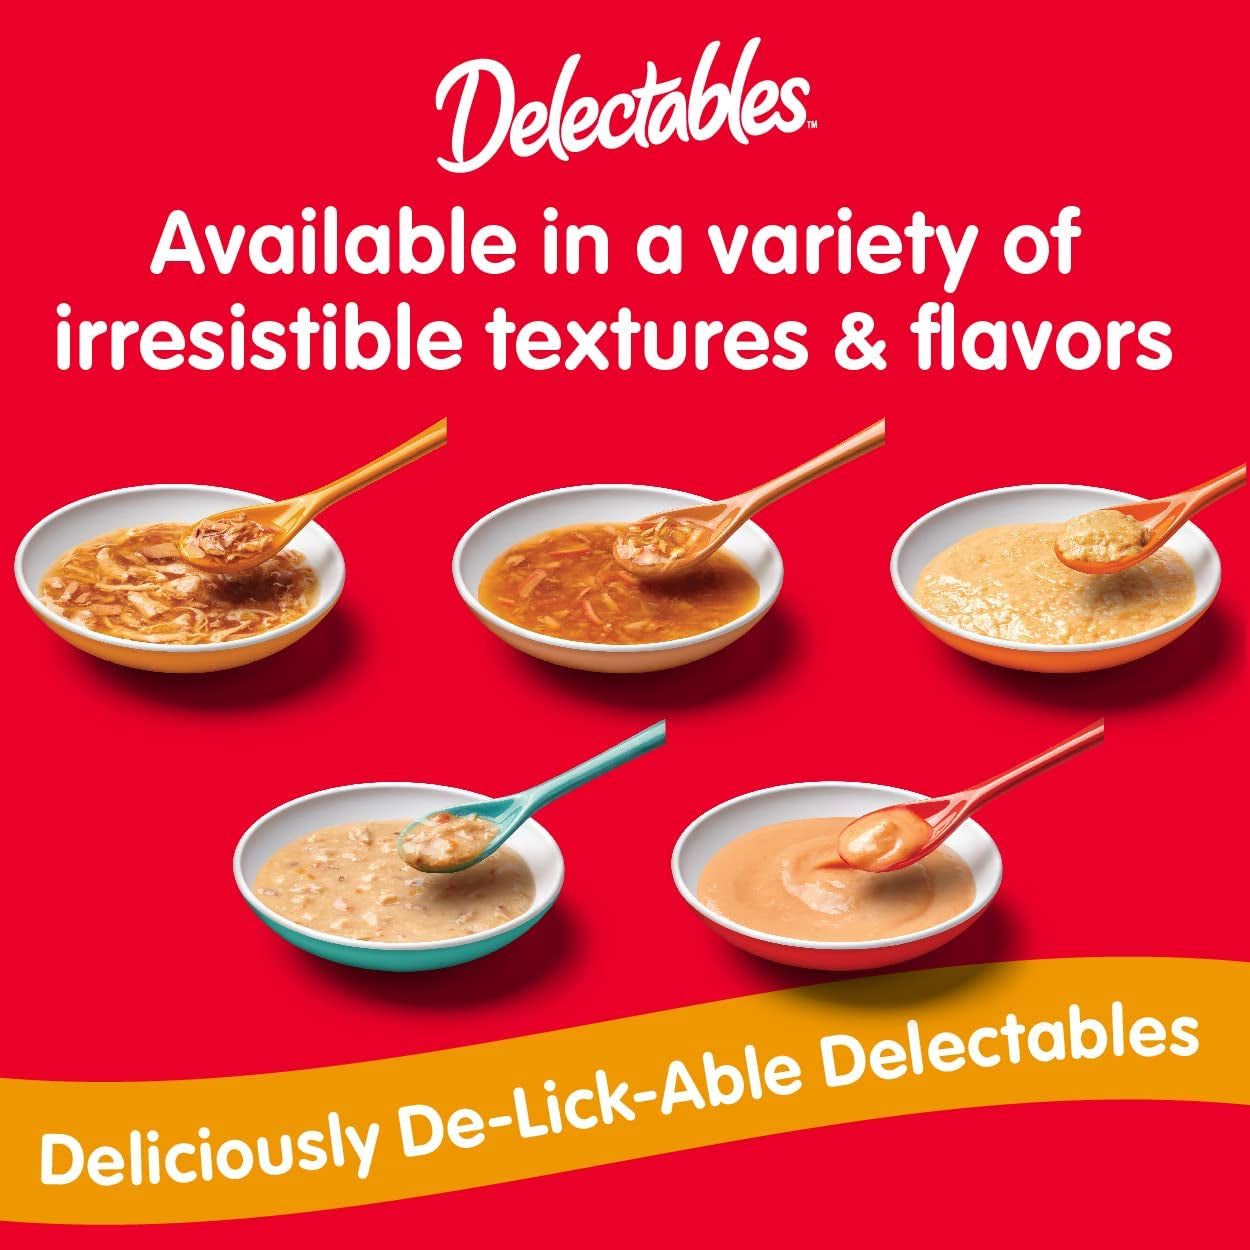 Delectables Stew Lickable Wet Cat Treats for Adult & Senior Cats, Variety Pack, 12 Count